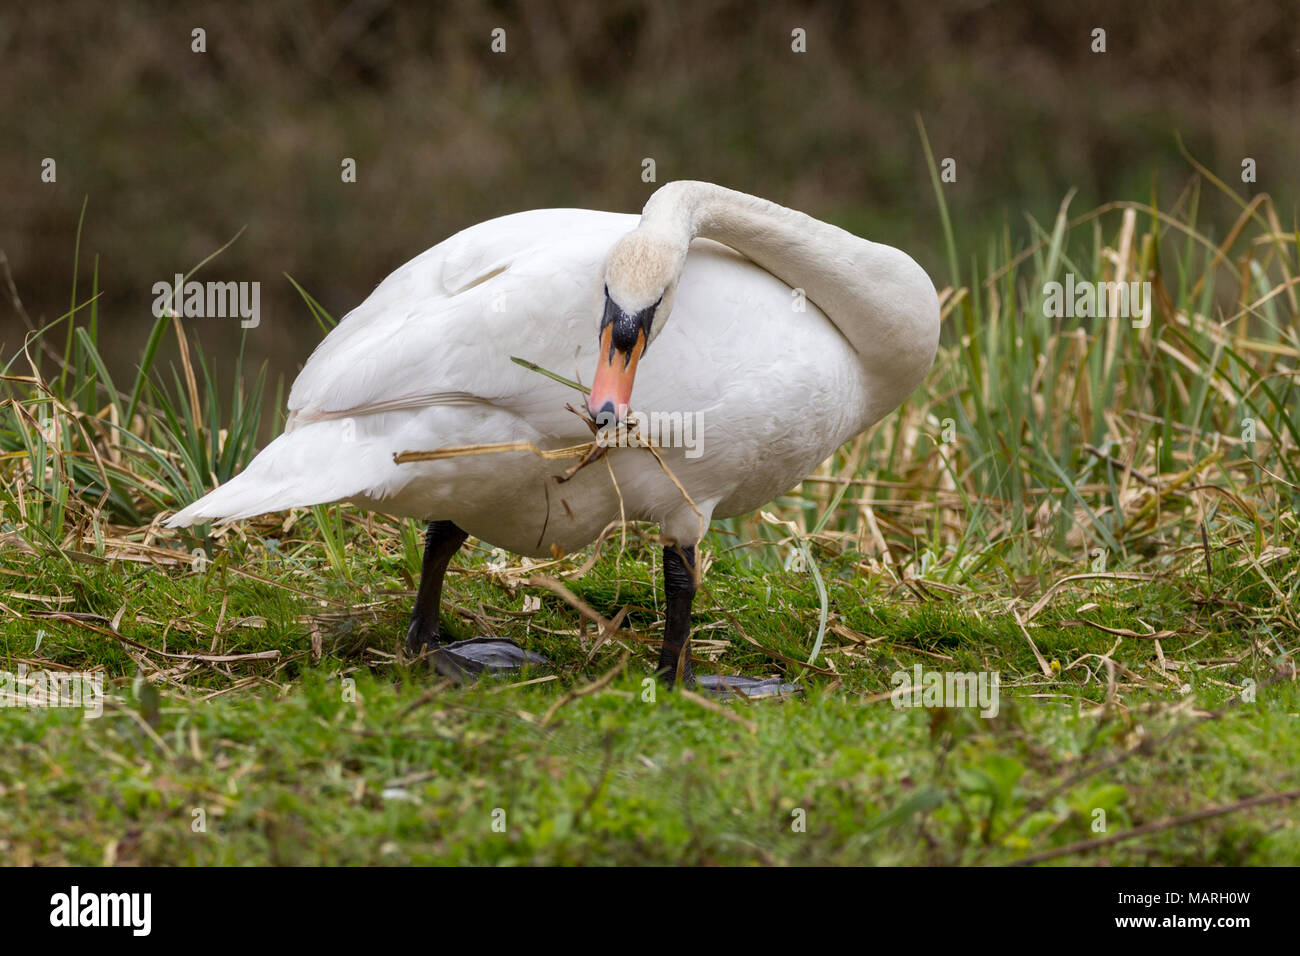 Mute swan (Cygnus olor) building a nest at the lakeside. This male is collecting reeds and passing them to the female on the nest nearby to arrange. Stock Photo